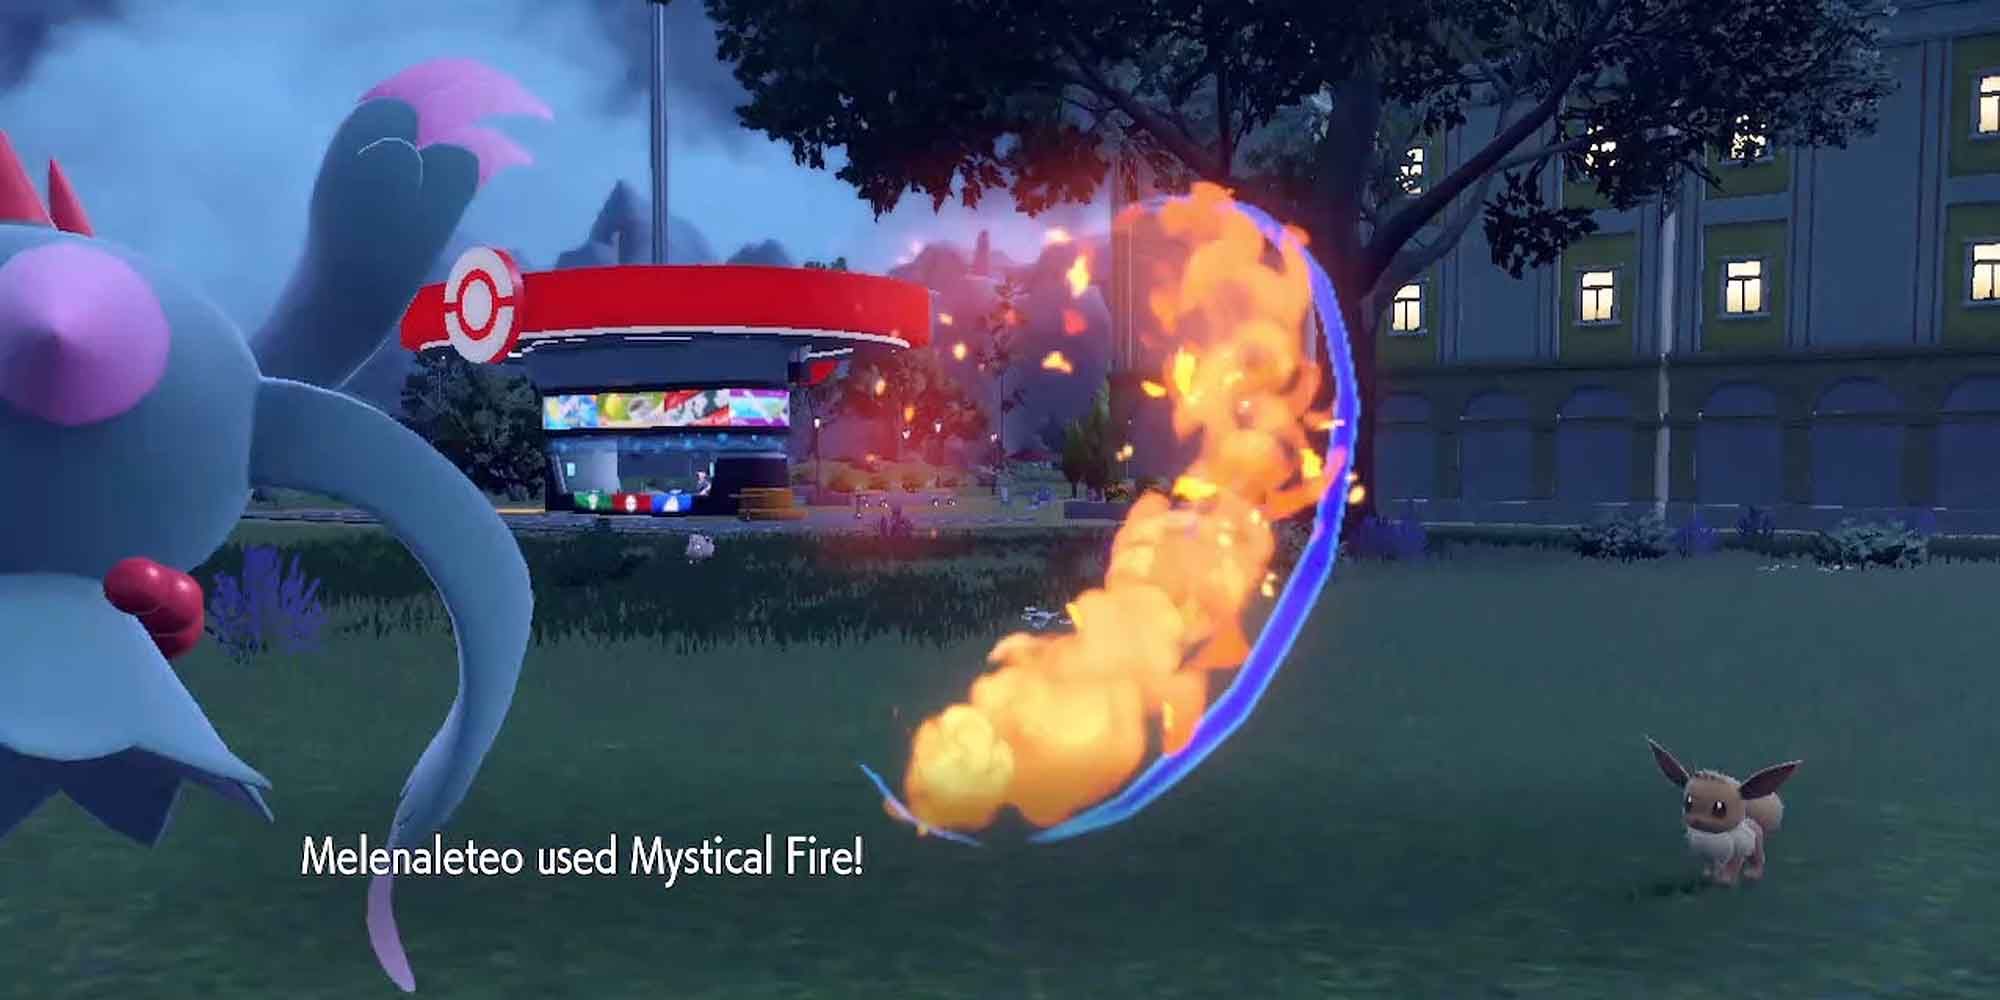 Using Mystical Fire against Eevee in Pokemon